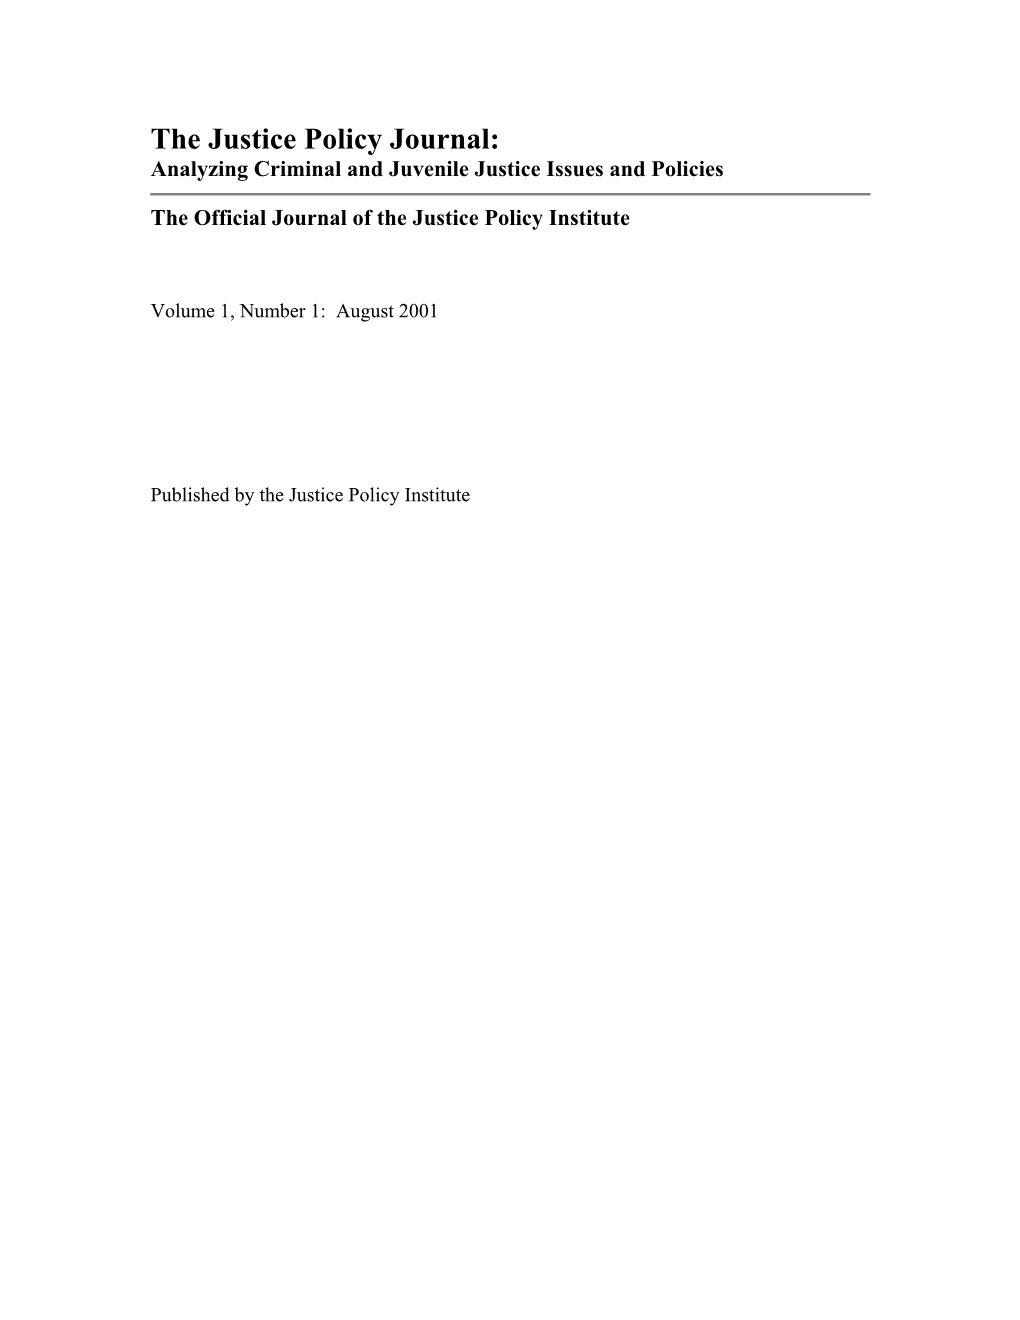 Justice Policy Journal Volume 1, Number 1: August 2001